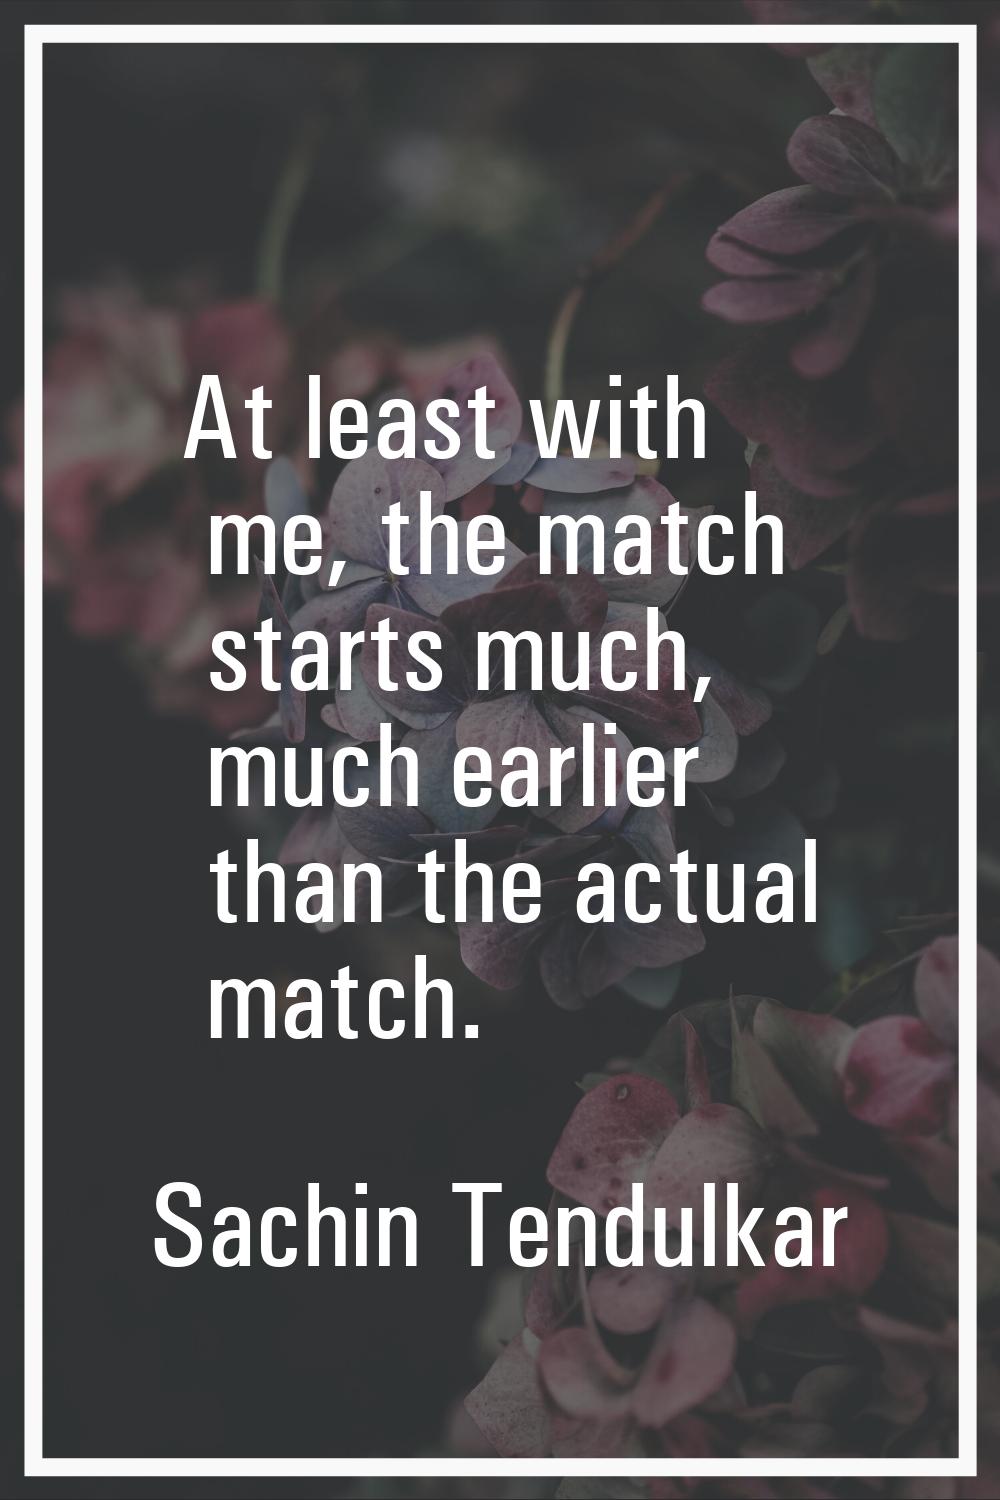 At least with me, the match starts much, much earlier than the actual match.